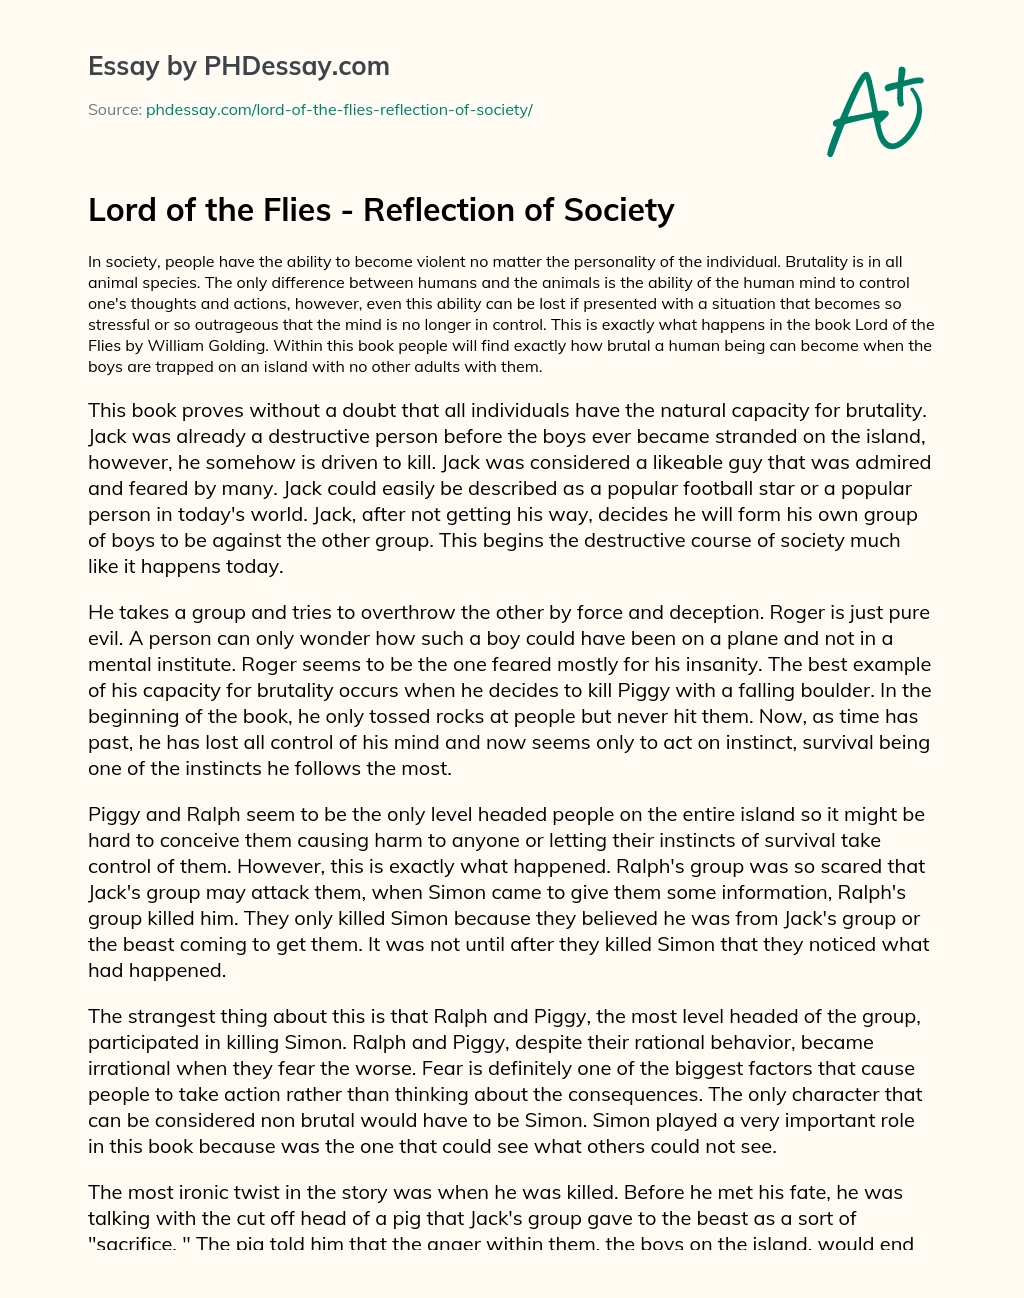 Lord of the Flies – Reflection of Society essay